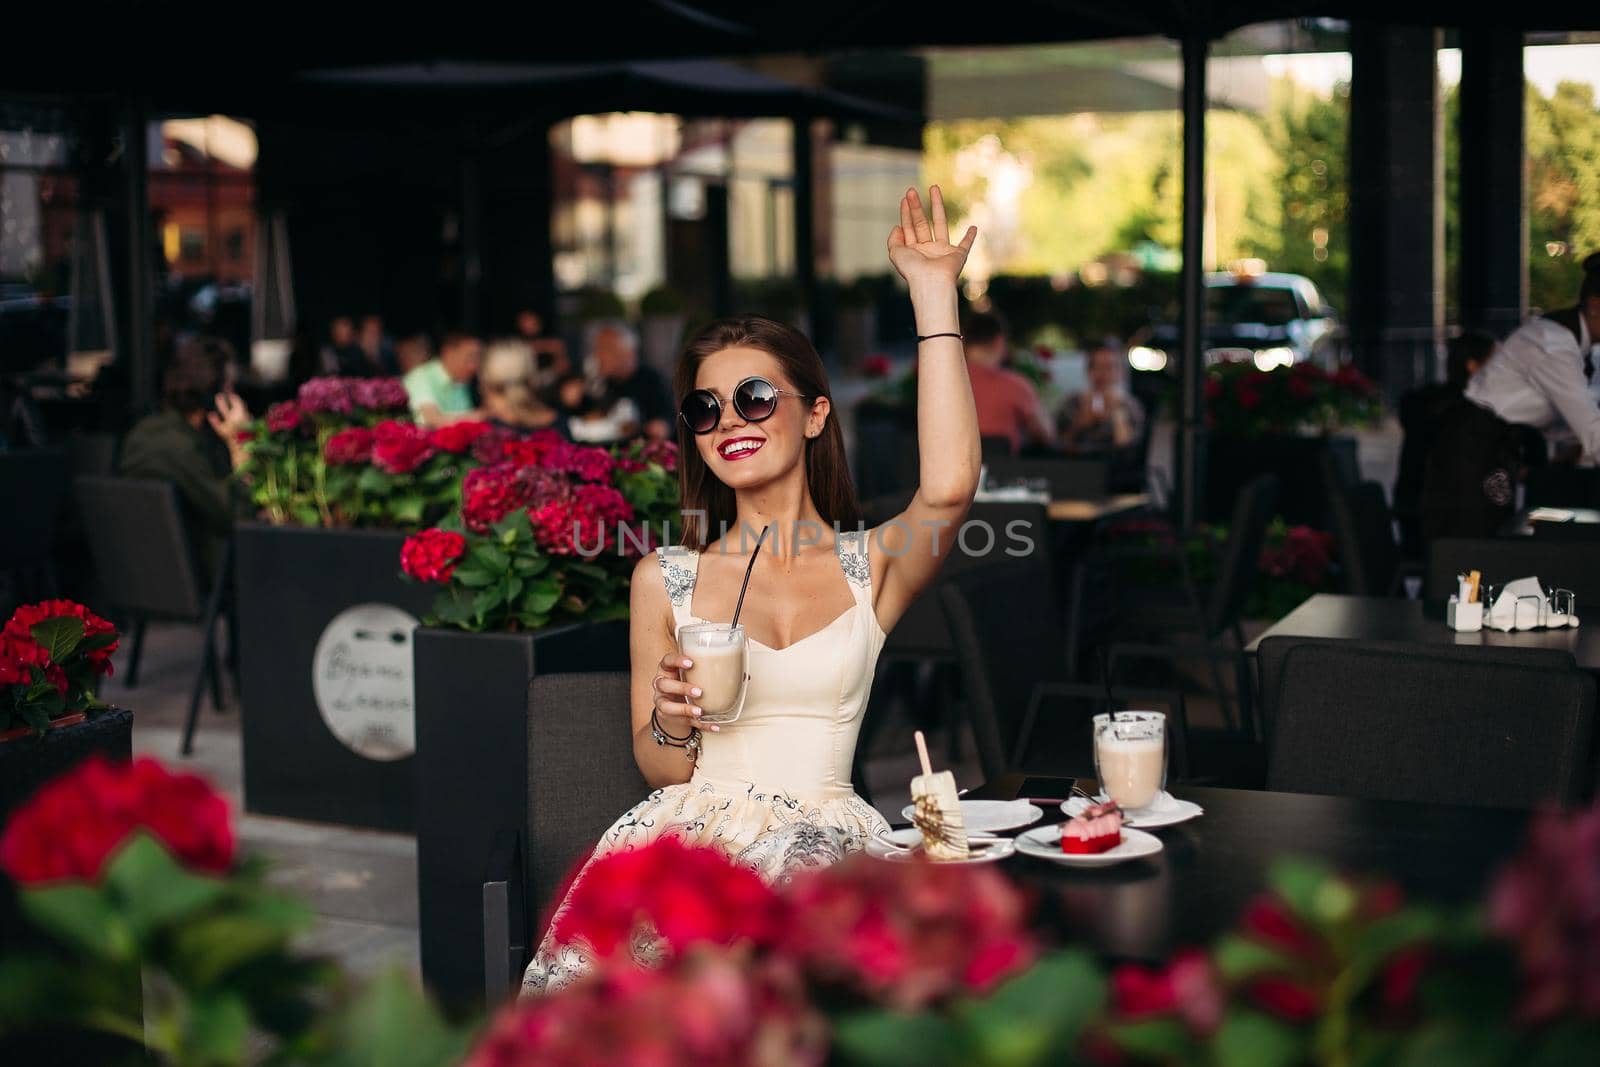 Portrait of a beautiful joyful brunette woman in a cafe. She is dressed in a sumptuous stylish pink dress and stylish glasses. He handsily lifts his hand up and holds a cocktail. Concept of a joyful woman in a cafe.